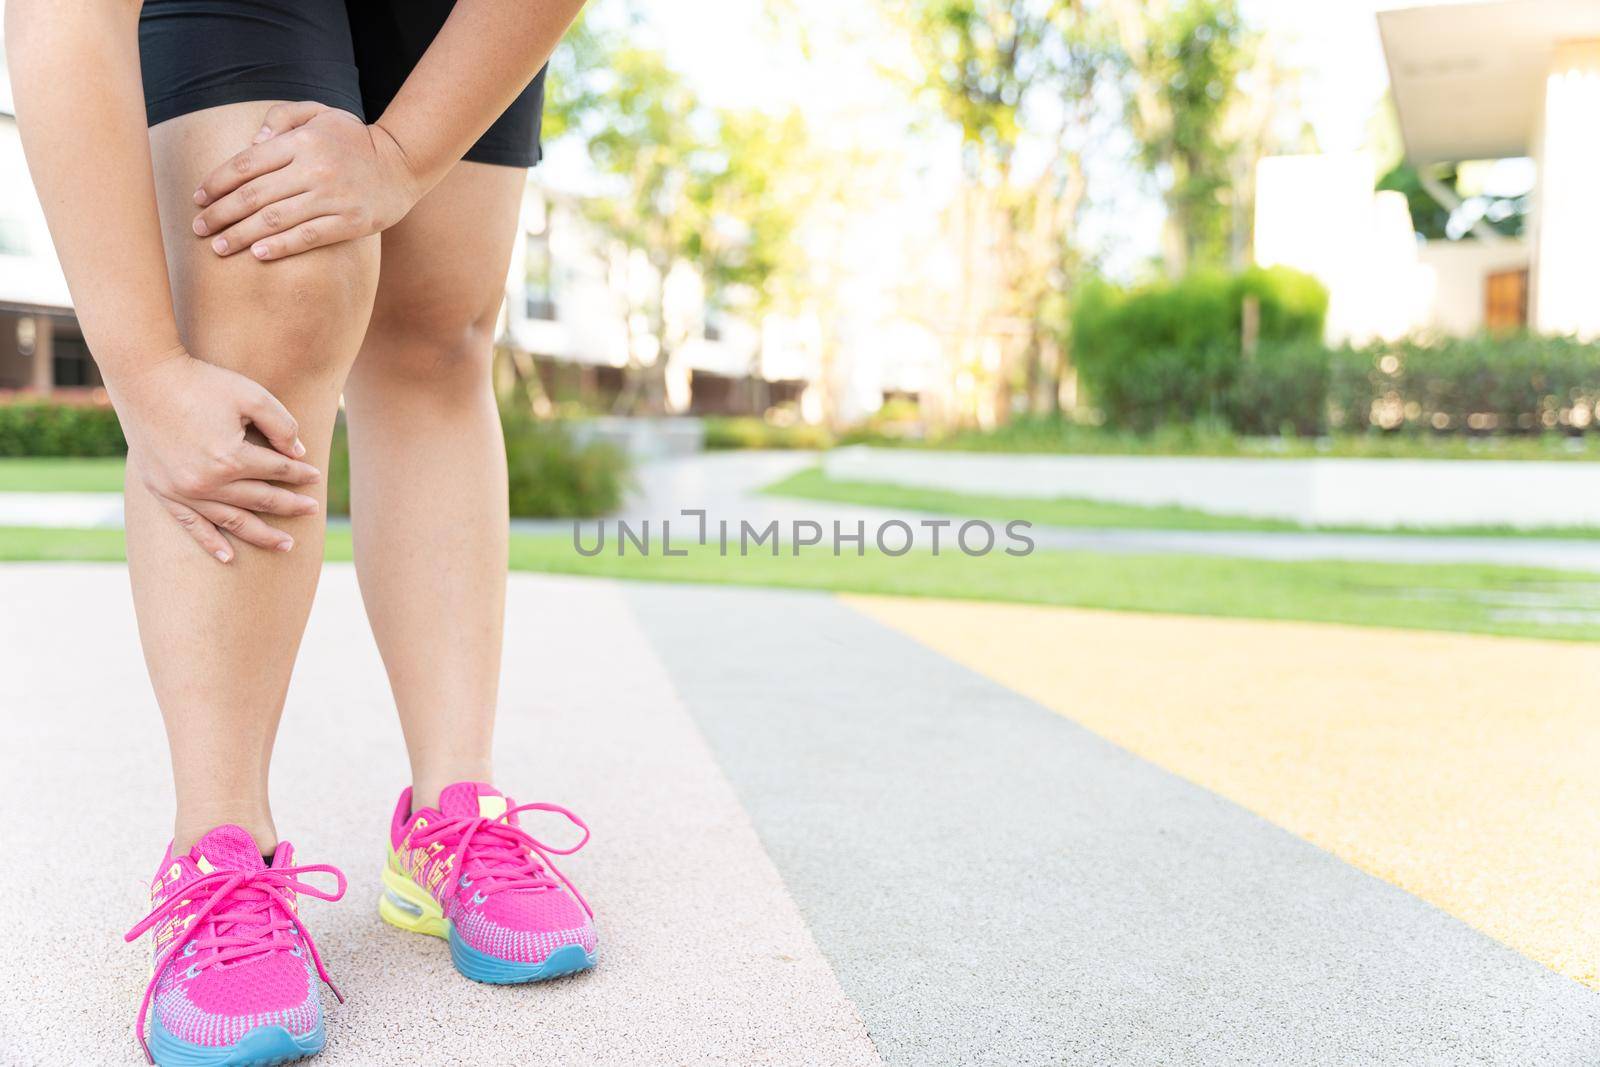 Female fatty runner athlete leg injury and pain. Hands grab painful knee while running in the park. by mikesaran